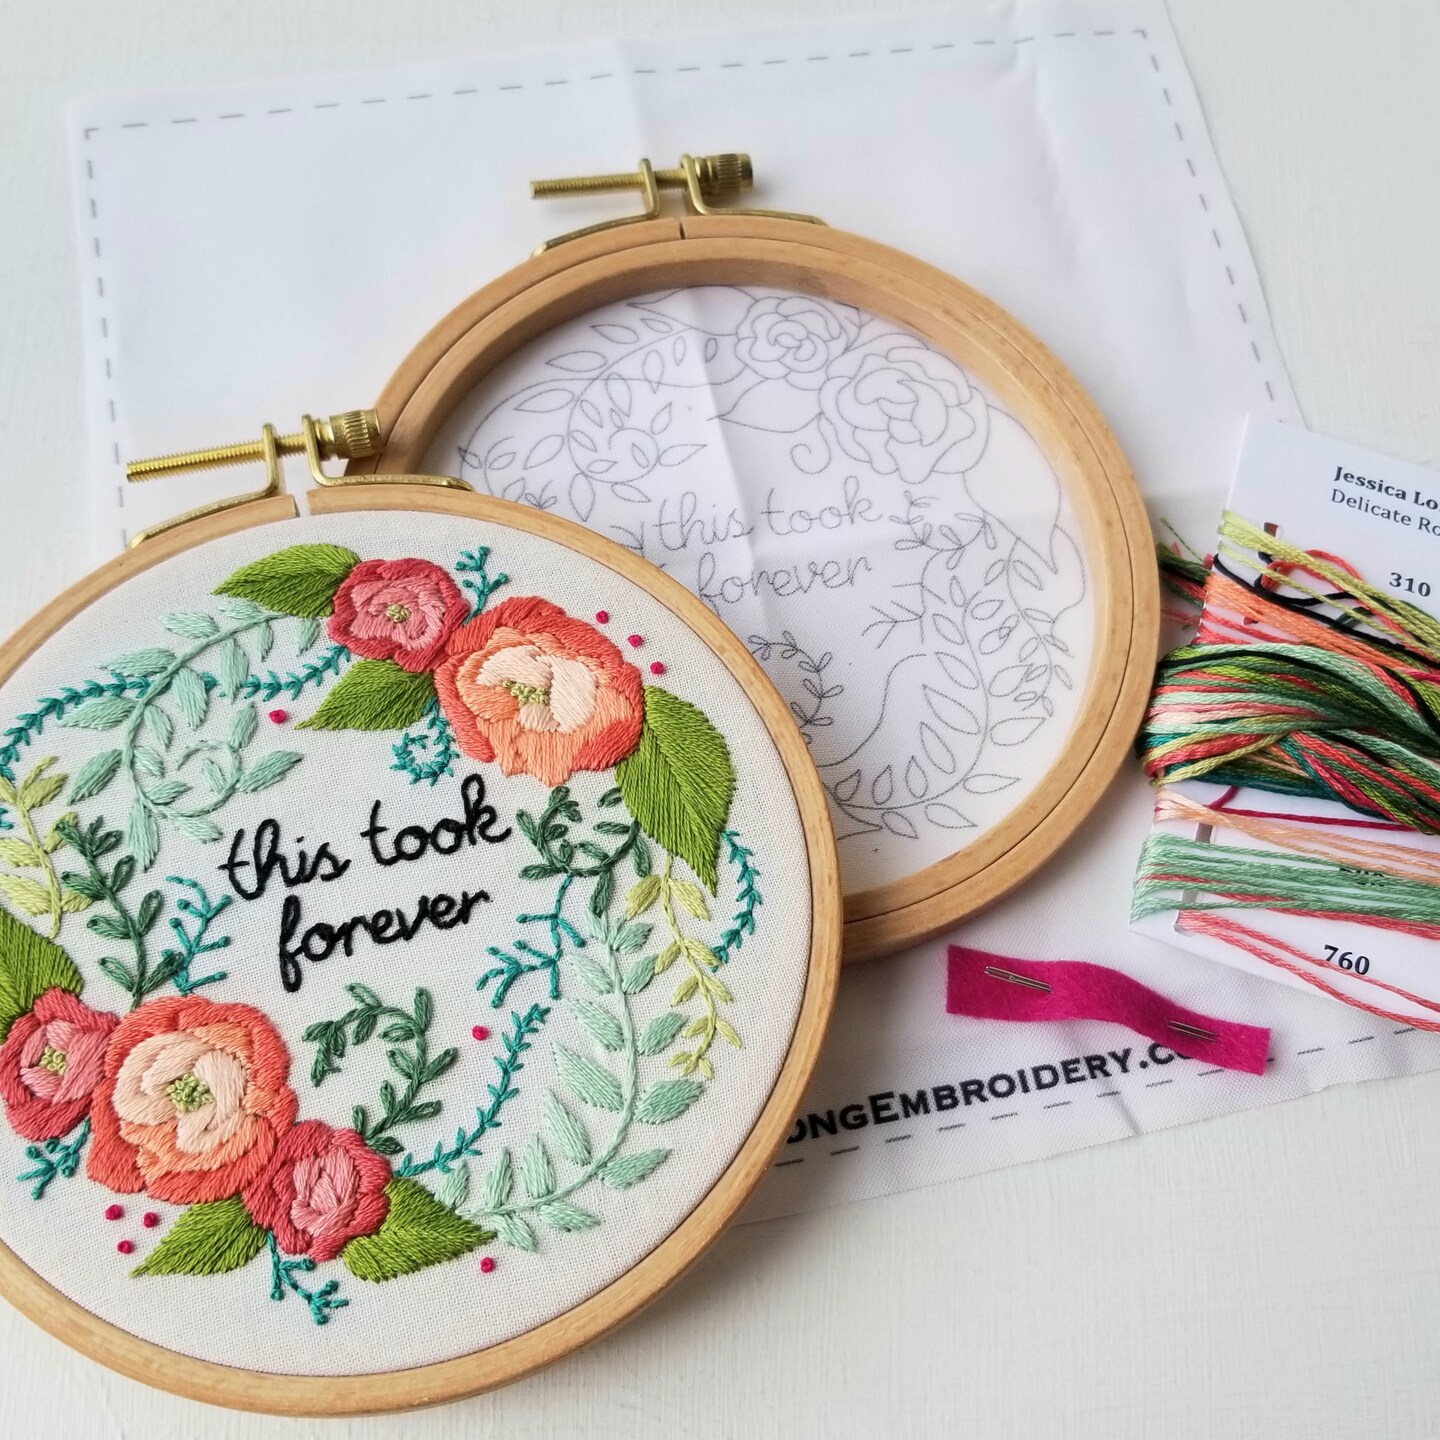 Our all new “Learn to Embroider Kit” has everything you need to learn